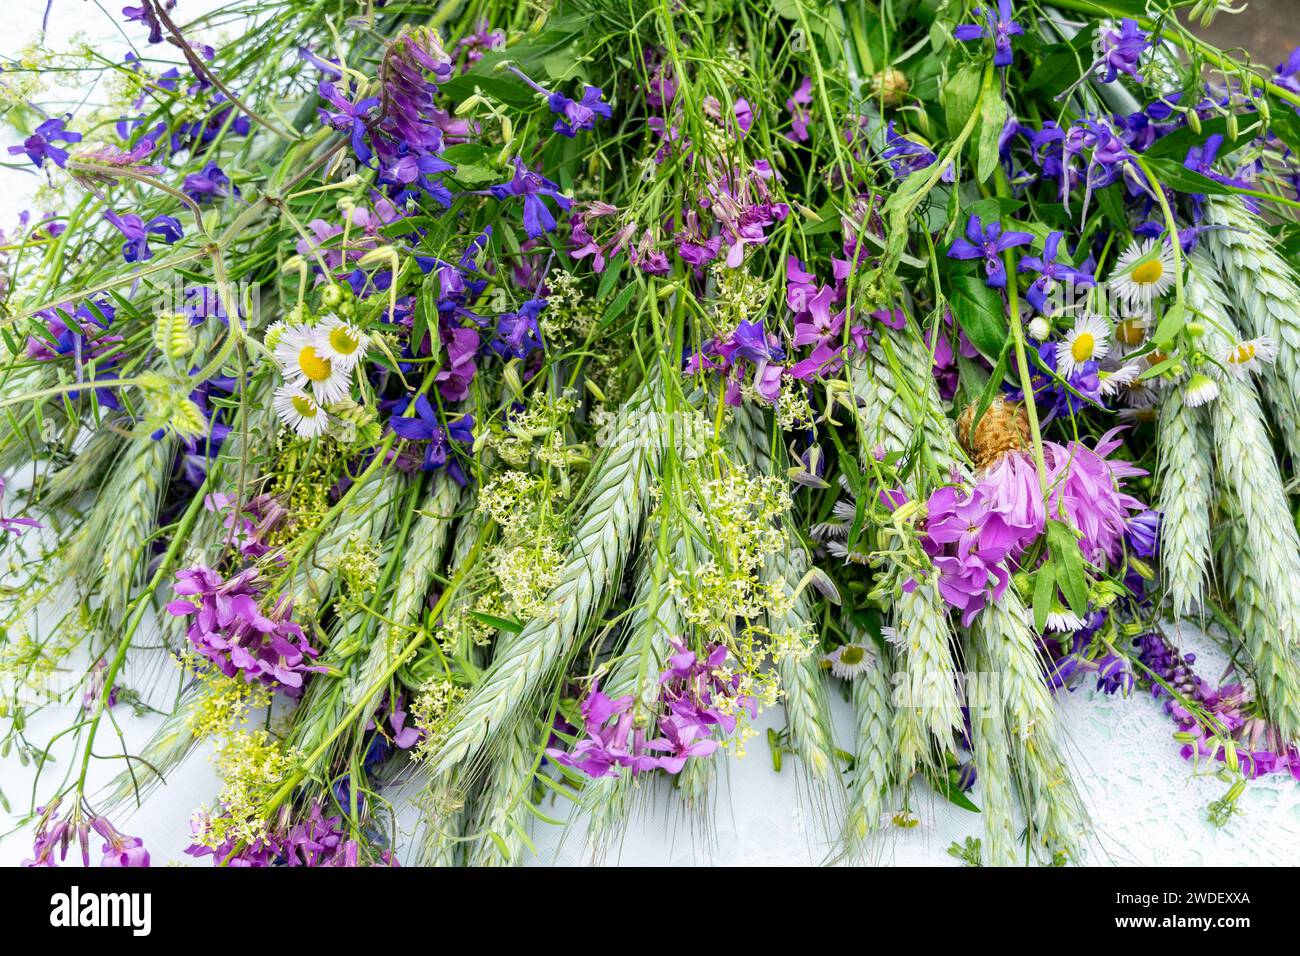 A bouquet of spikelets and wild flowers Stock Photo